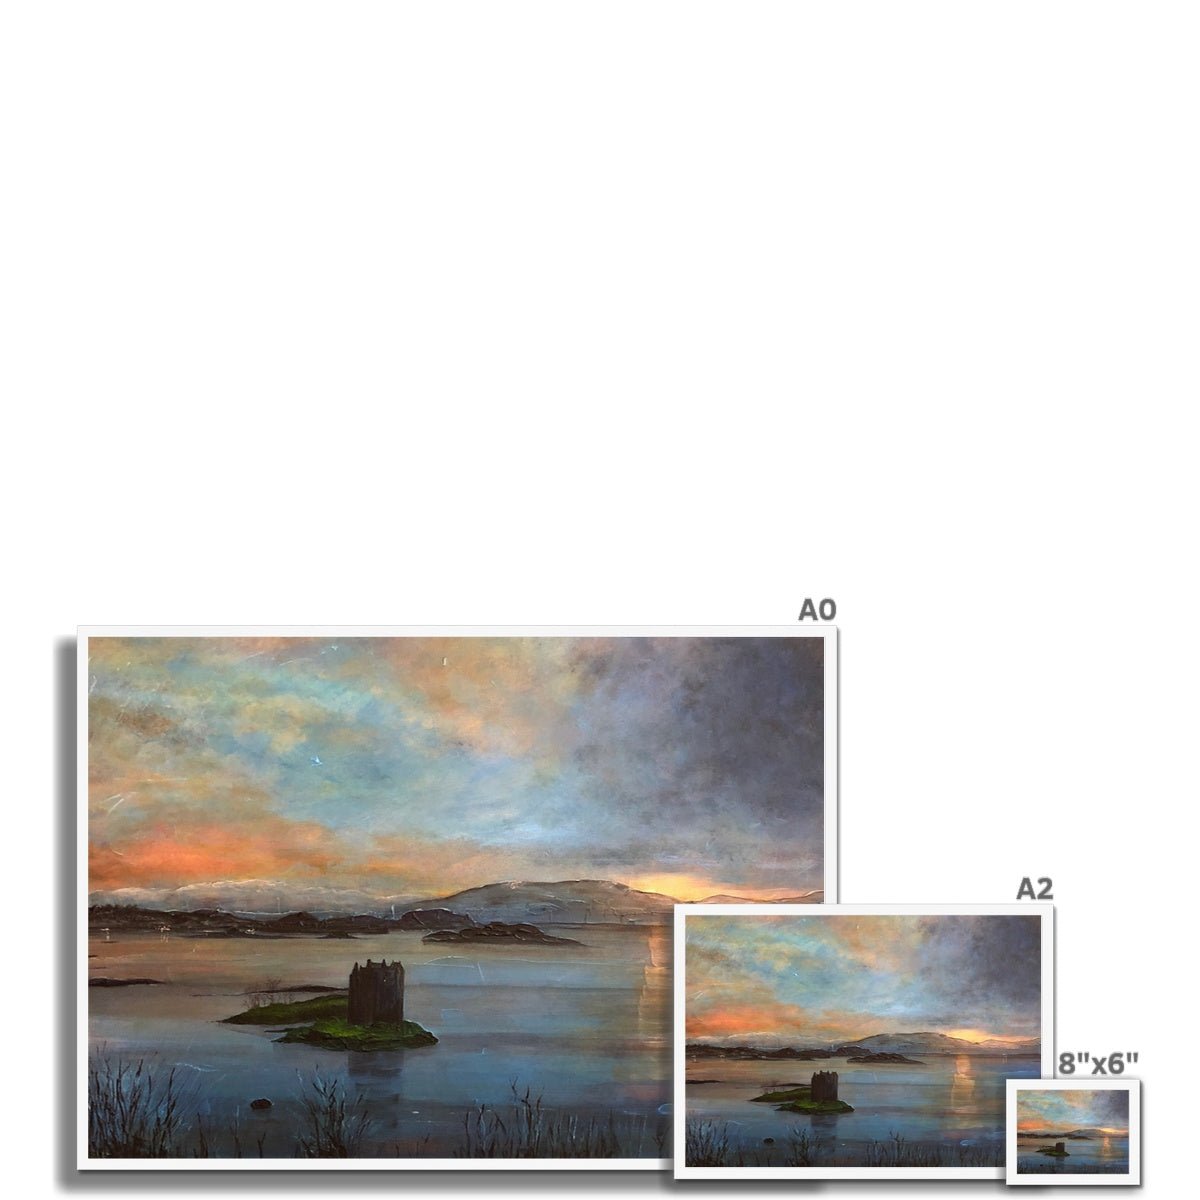 Castle Stalker Twilight Painting | Framed Prints From Scotland-Framed Prints-Historic & Iconic Scotland Art Gallery-Paintings, Prints, Homeware, Art Gifts From Scotland By Scottish Artist Kevin Hunter